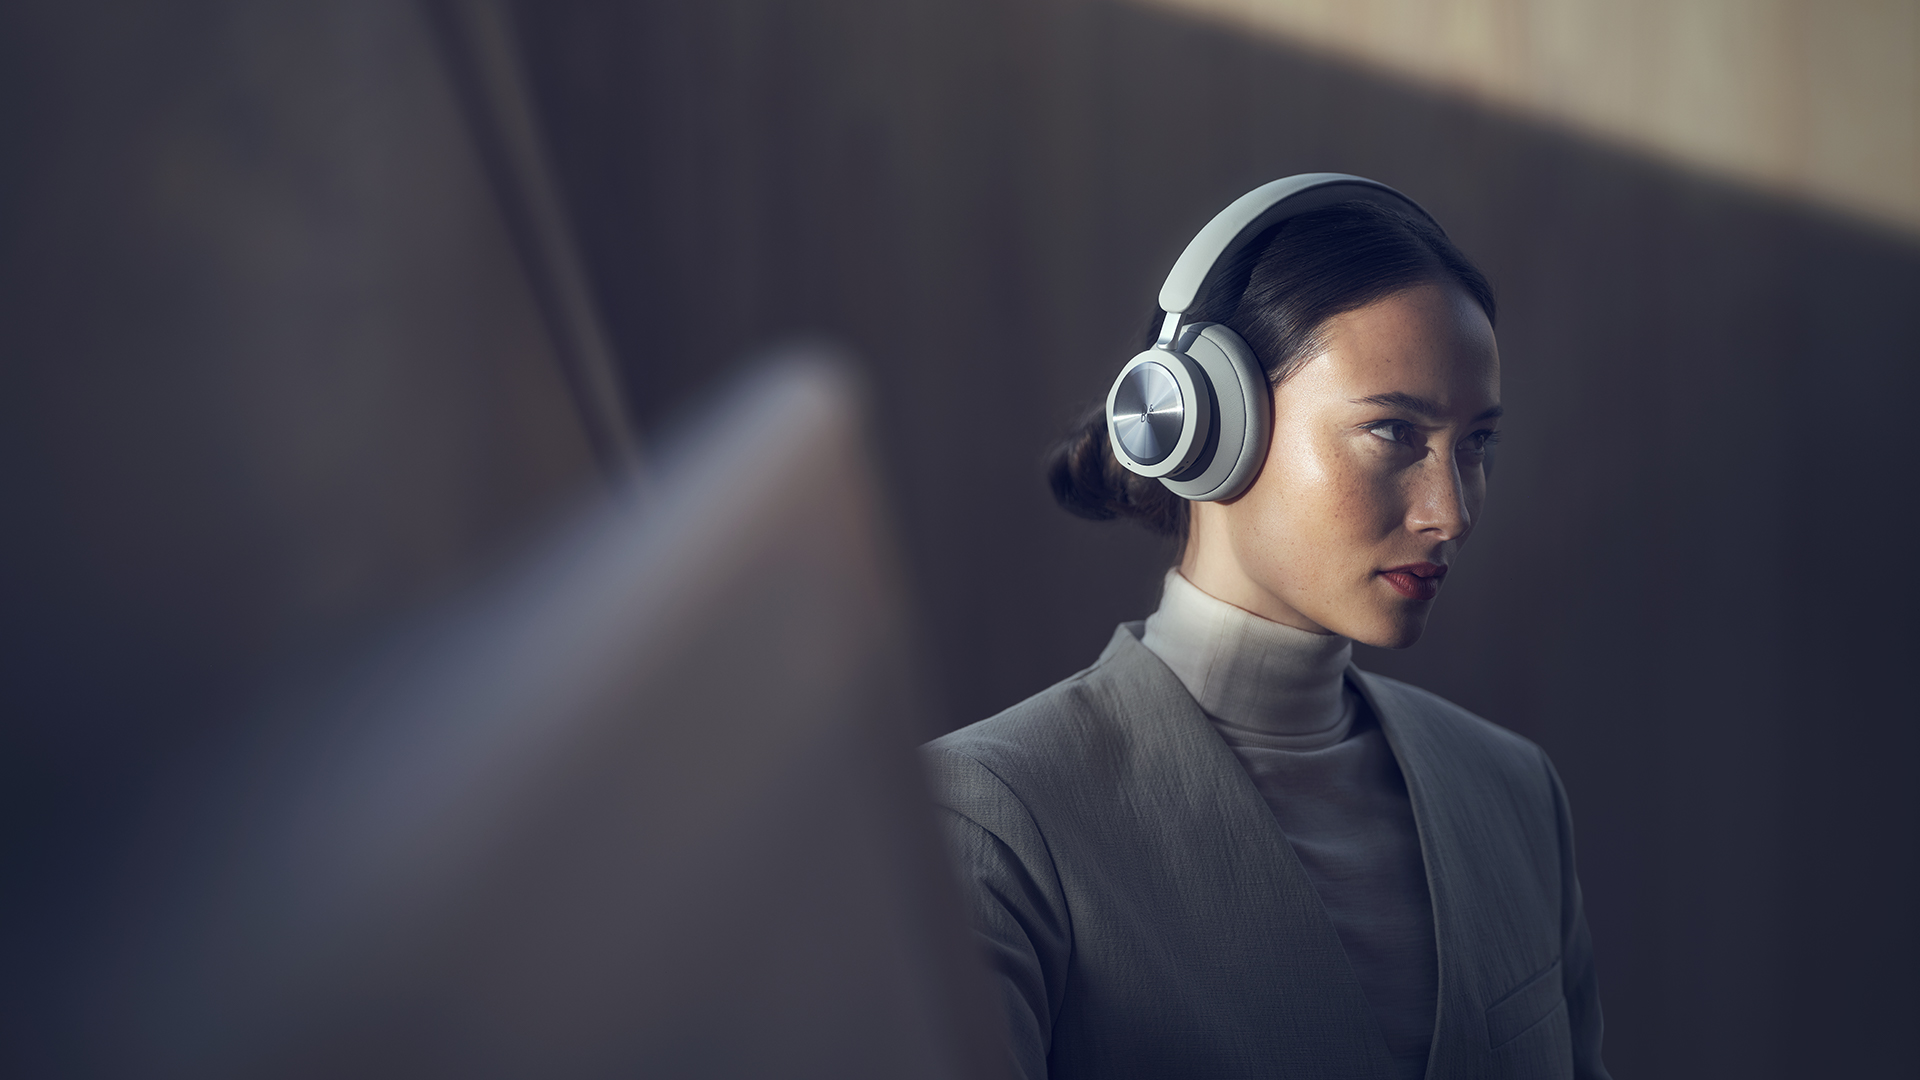 BANG & OLUFSEN INTRODUCES NEW EDITION OF BEOPLAY PORTAL